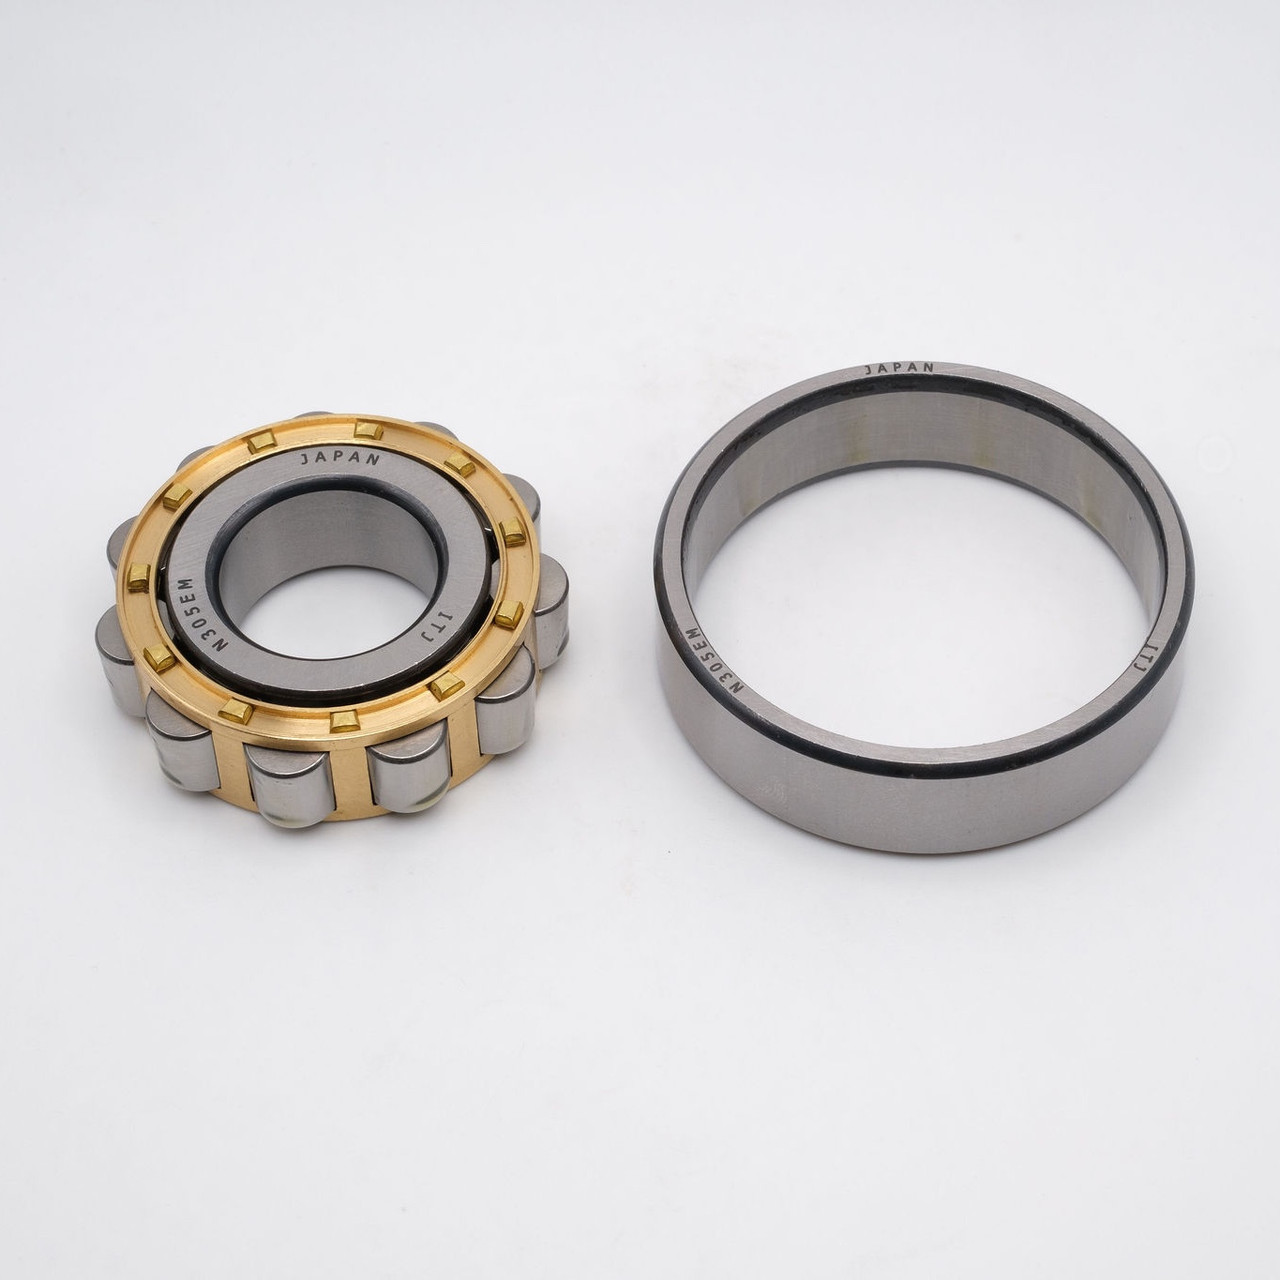 N212M Cylindrical Roller Bearing Brass Cage 60x110x22 Separated View